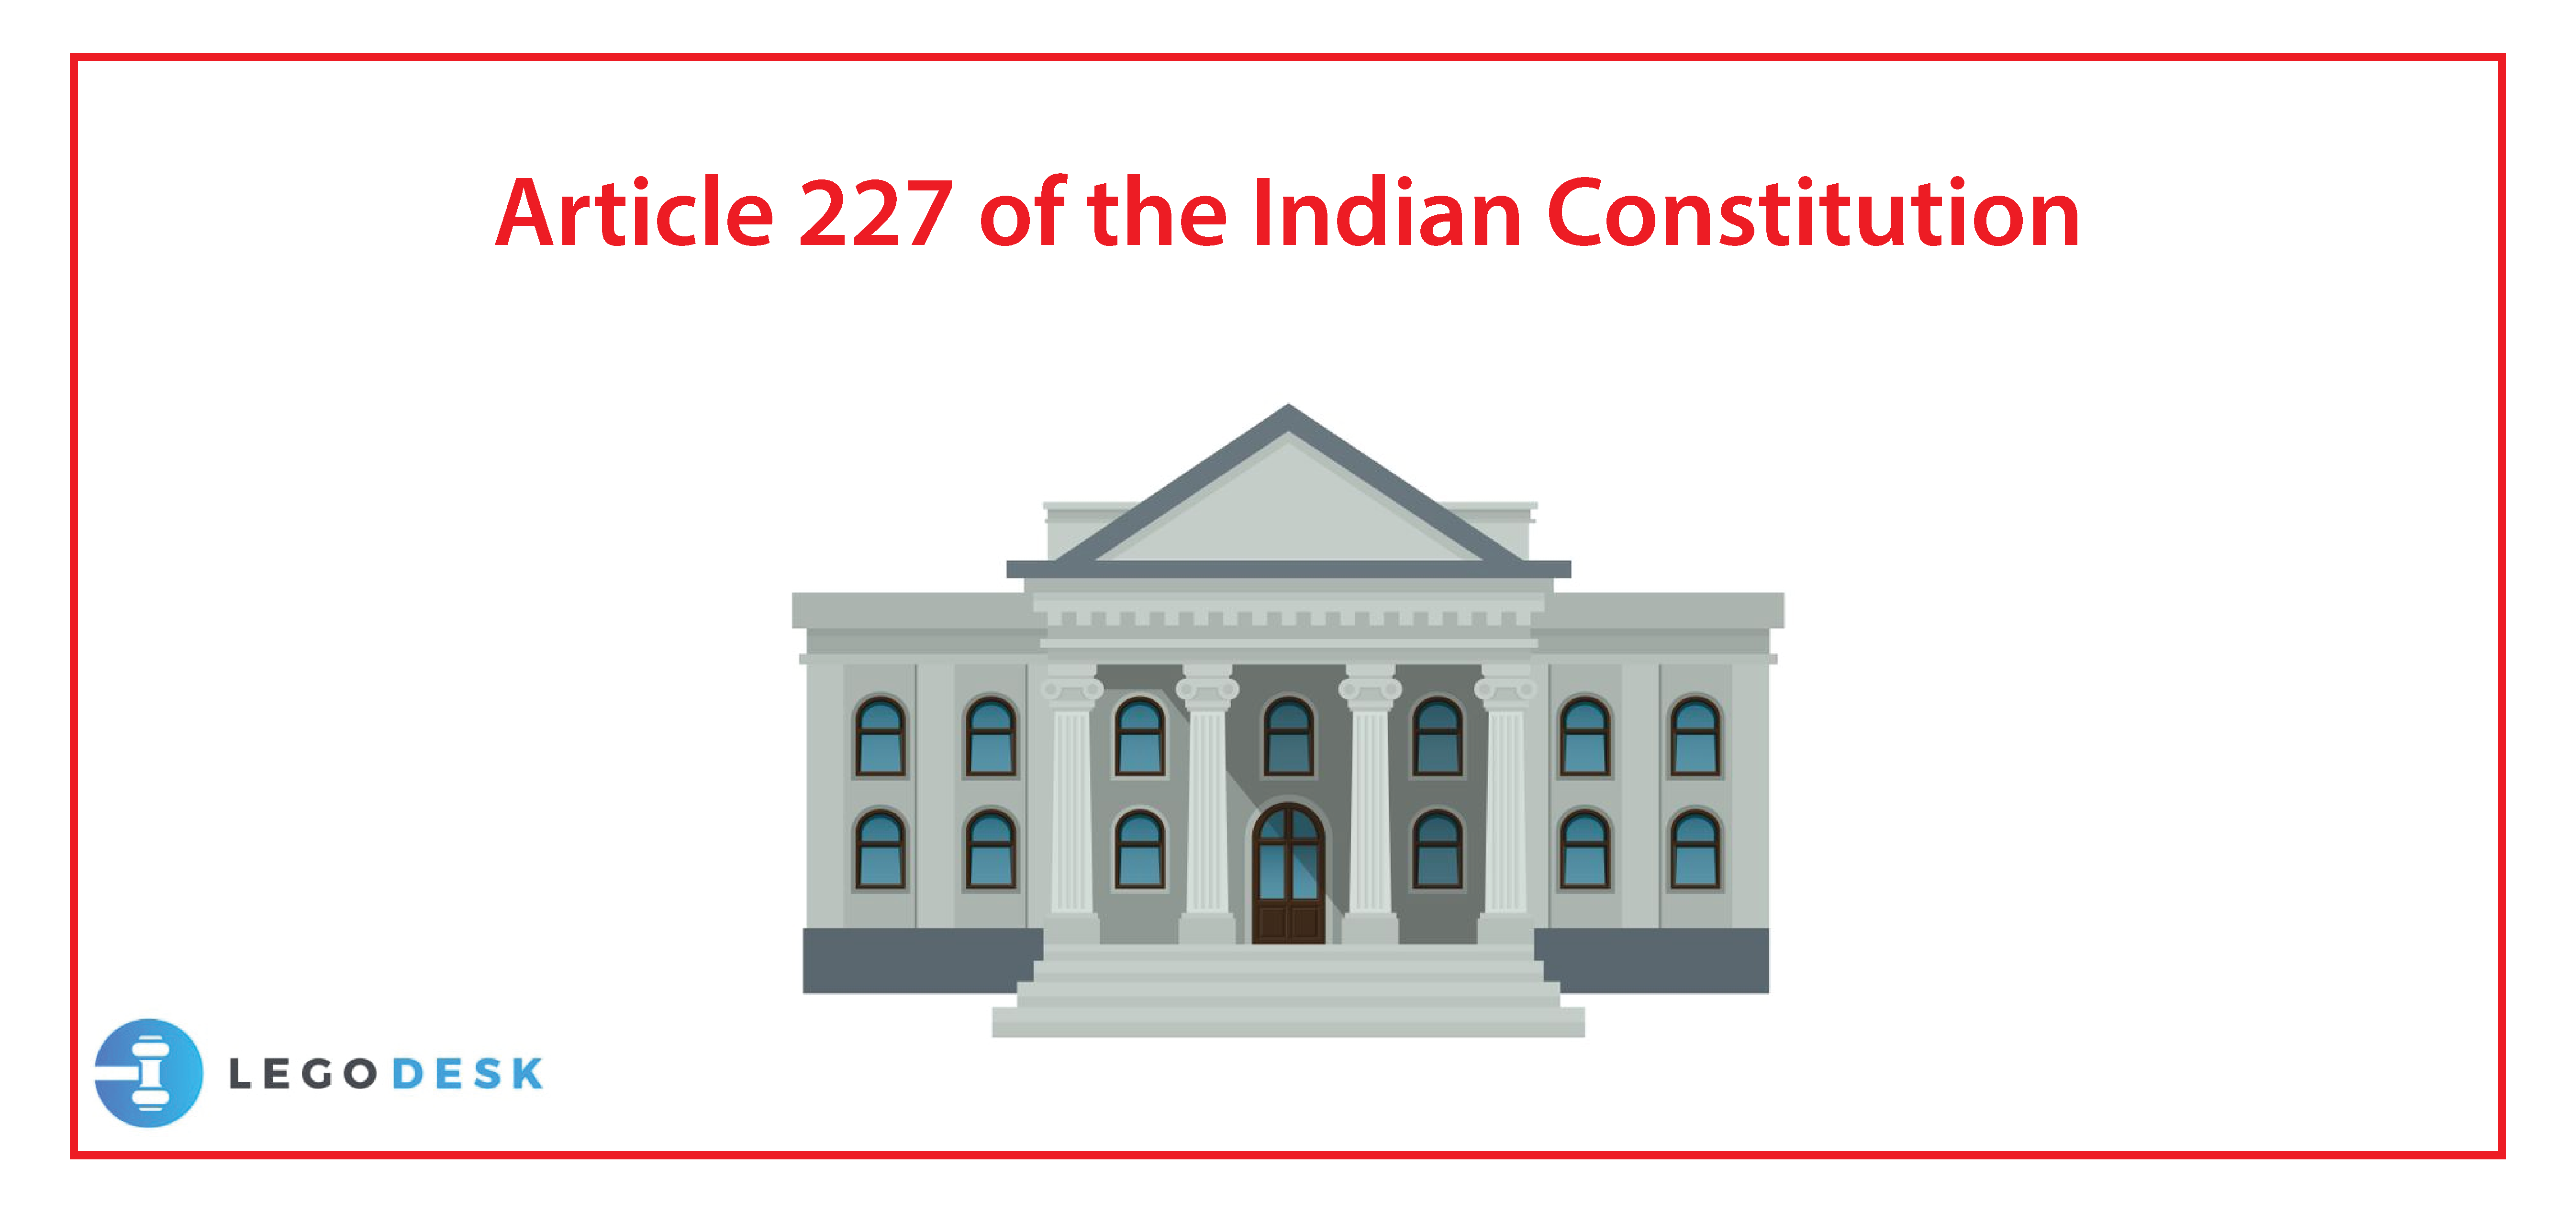 Article 227 of the Indian Constitution